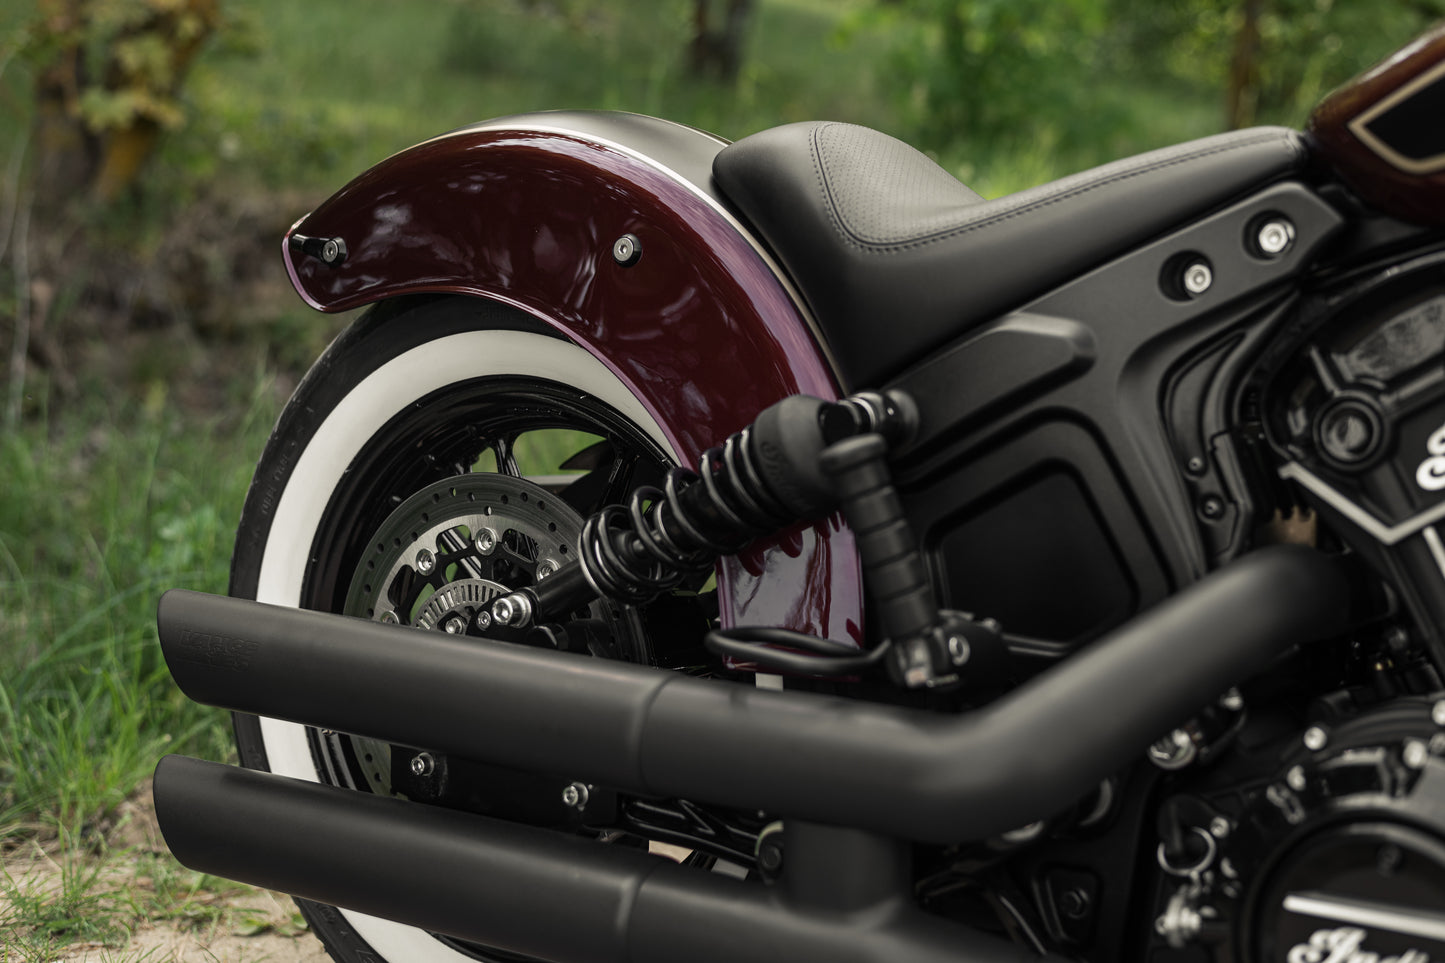 Harley Davidson motorcycle with Killer Custom "Apache" rear fender from the side in the forest